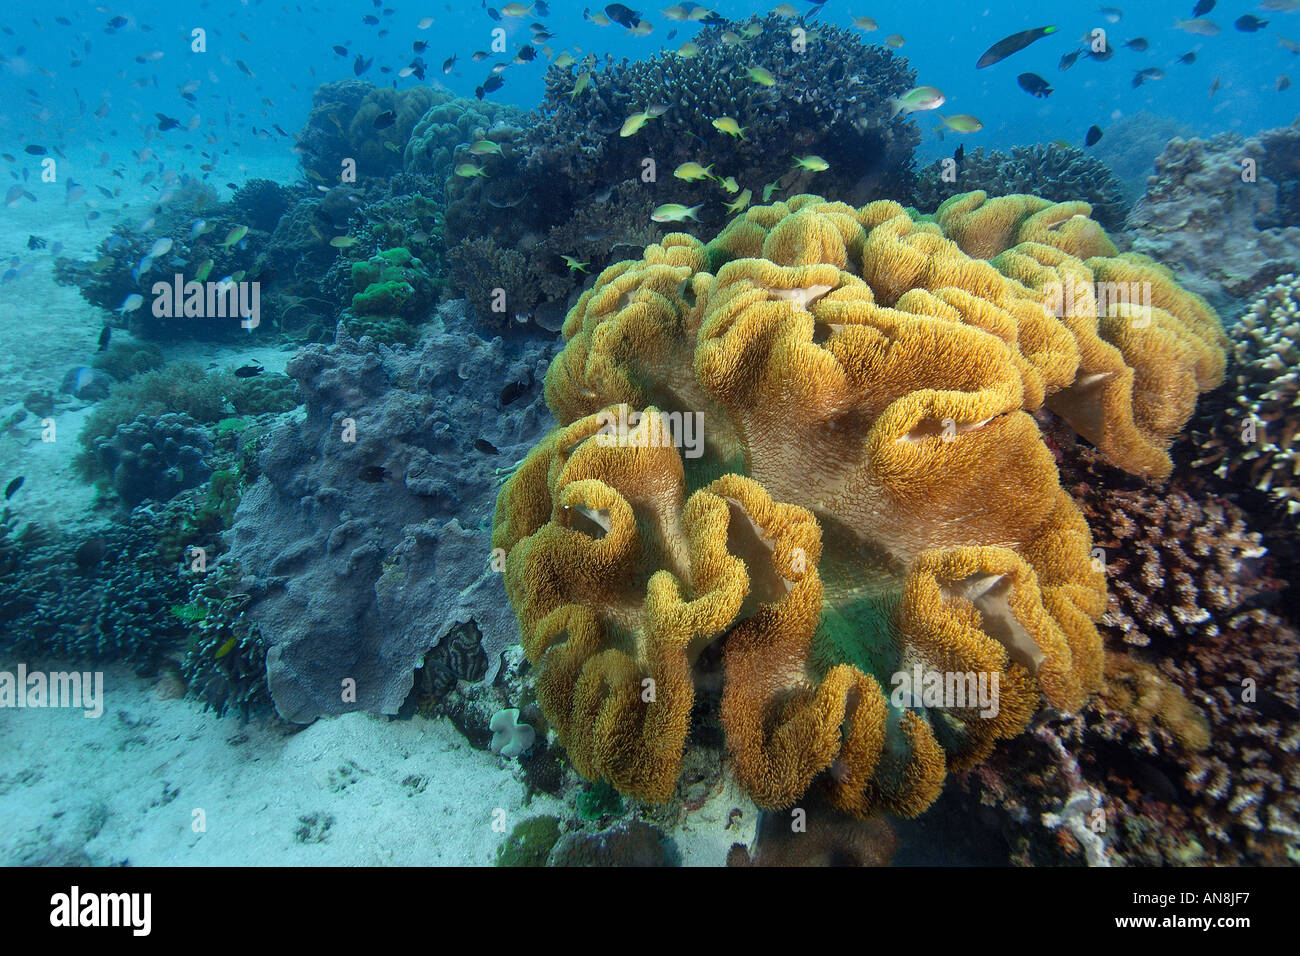 Leather coral Sarcophyton sp and thousands of reef fish Apo Island marine reserve Philippines Visayan sea Stock Photo